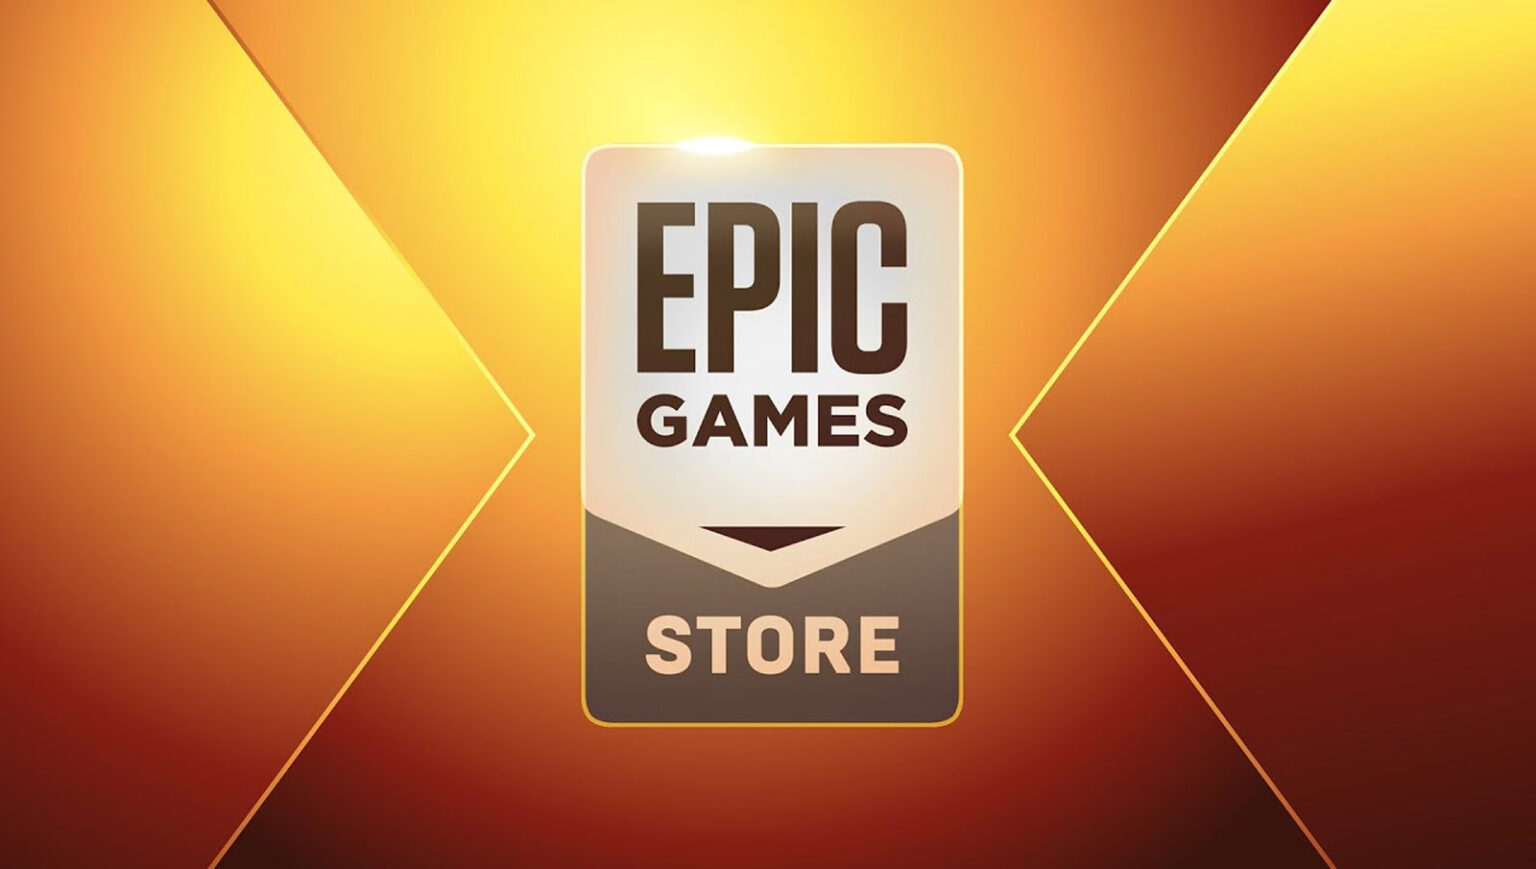 Epic Games will be giving certain accounts a few freebies as part of a class action lawsuit. Why are they doing this?